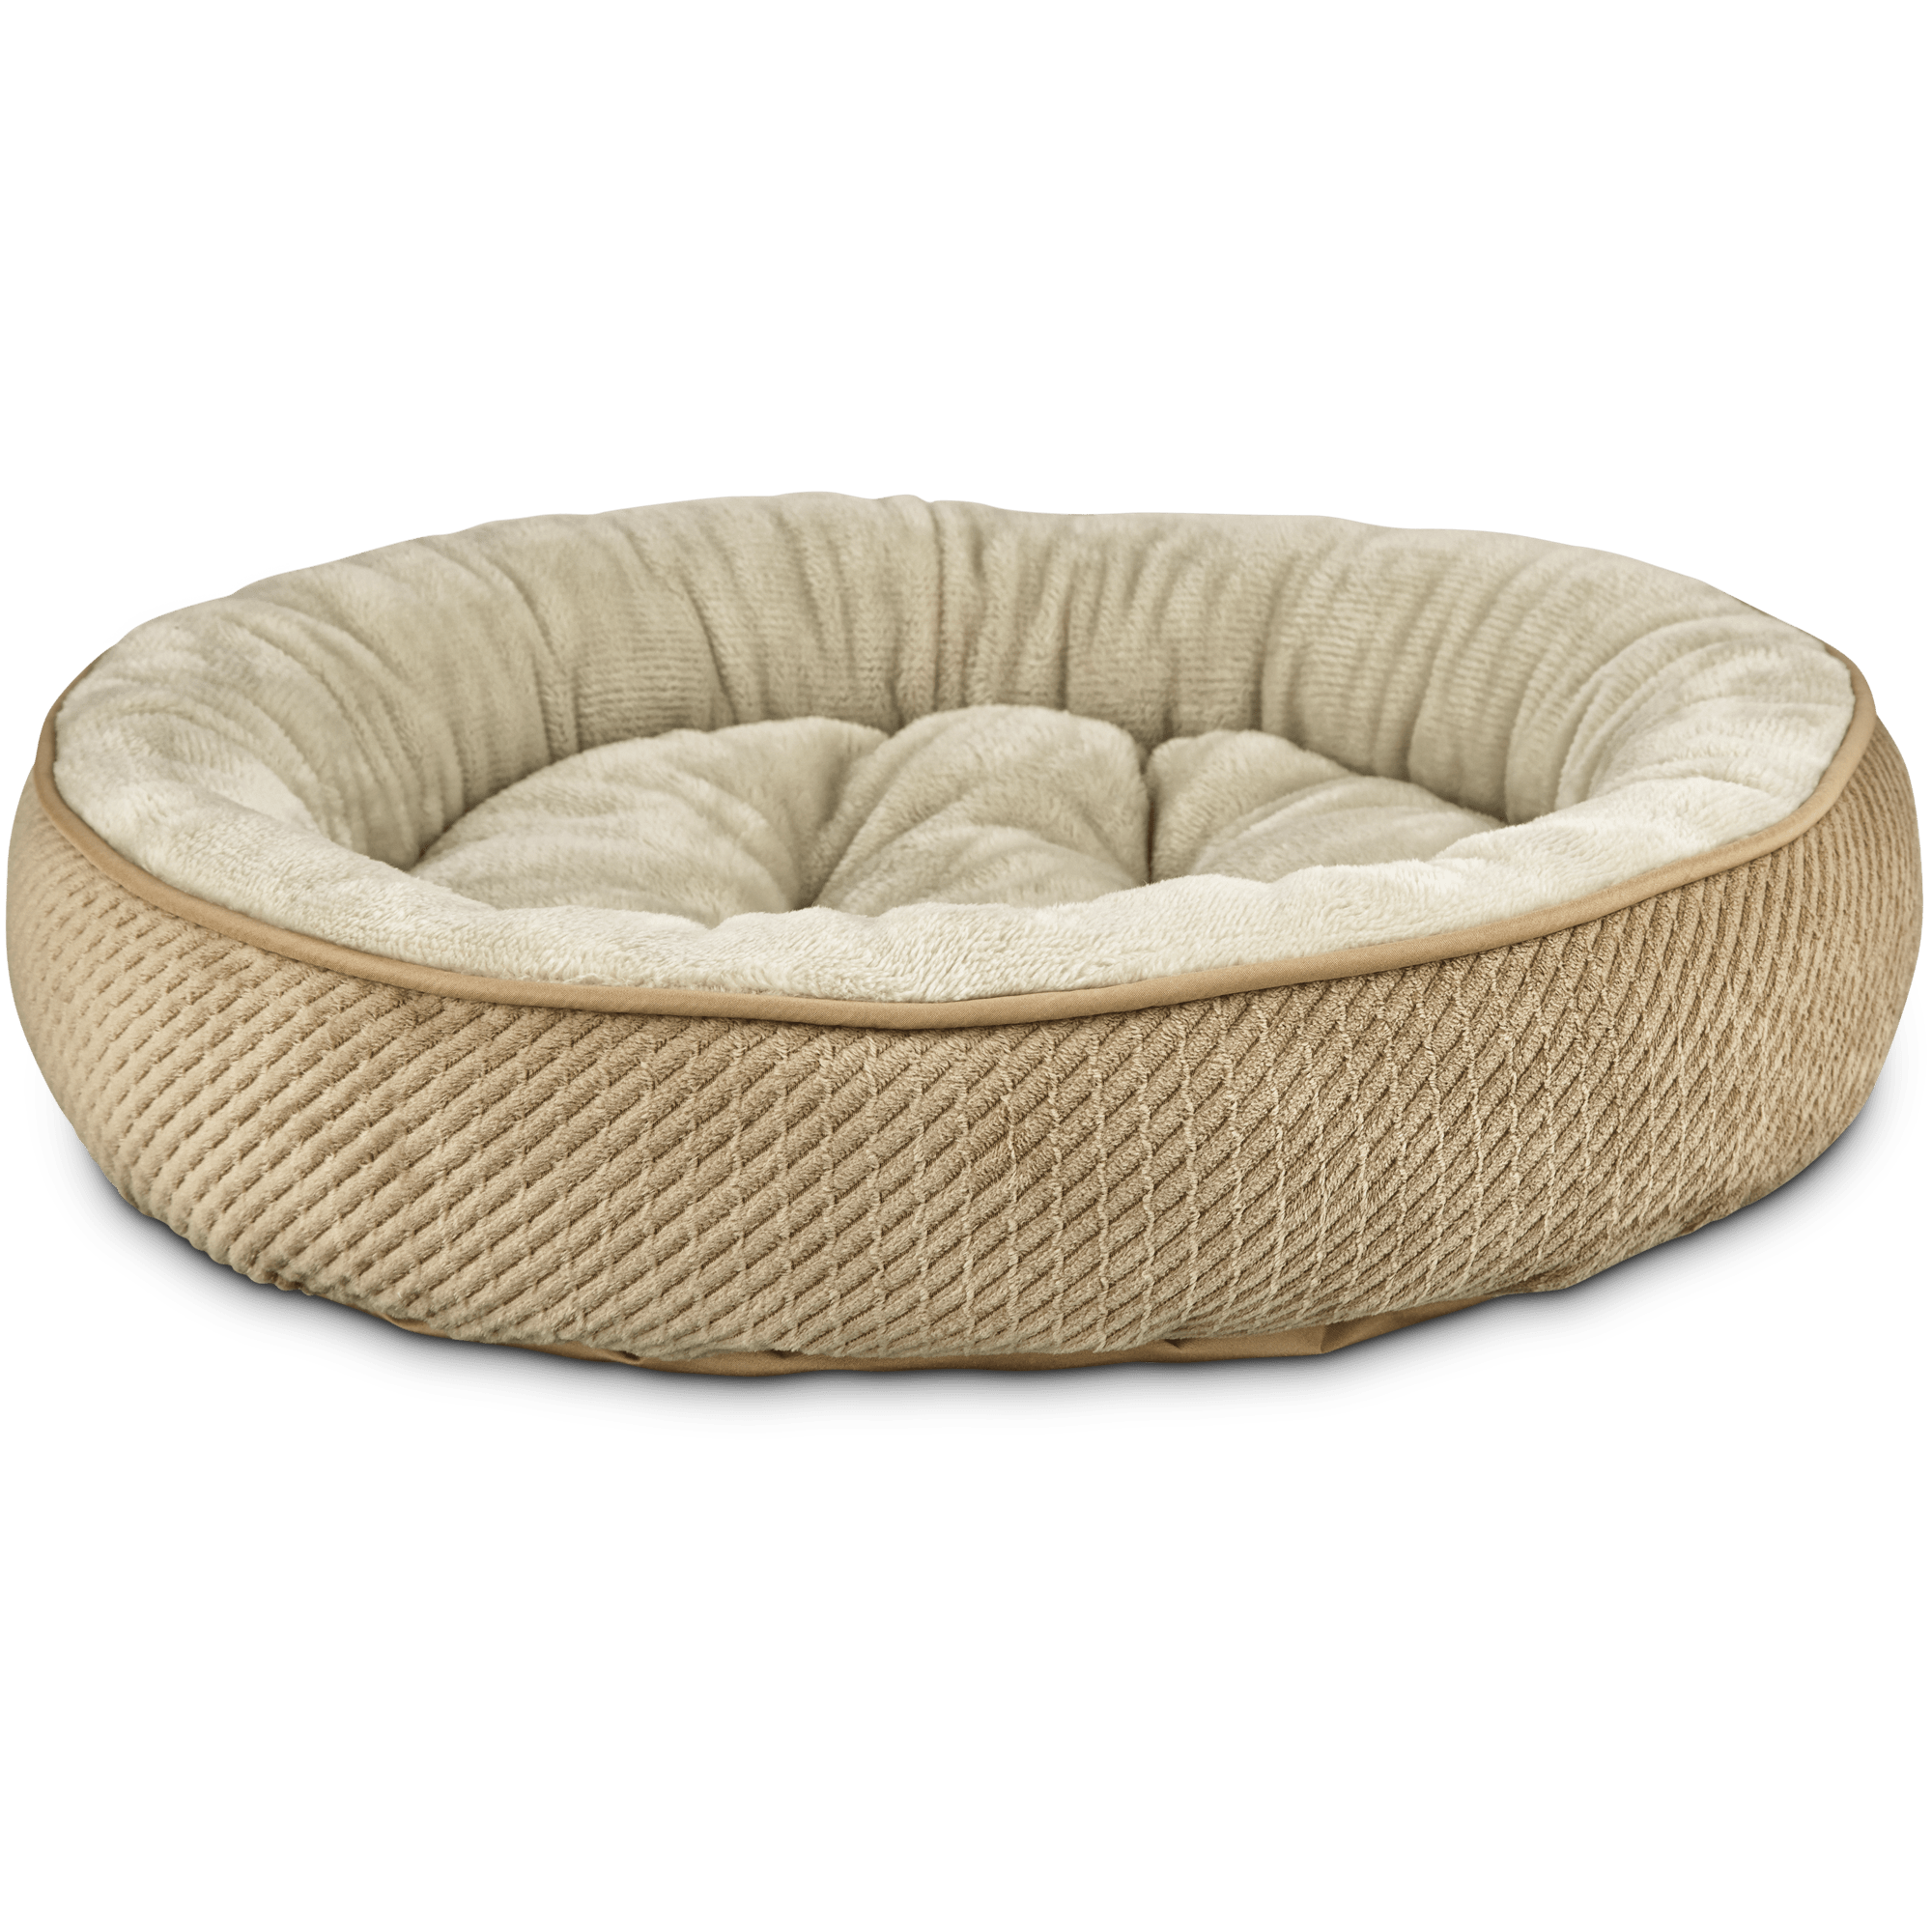 Harmony Textured Round Cat Bed in Tan 